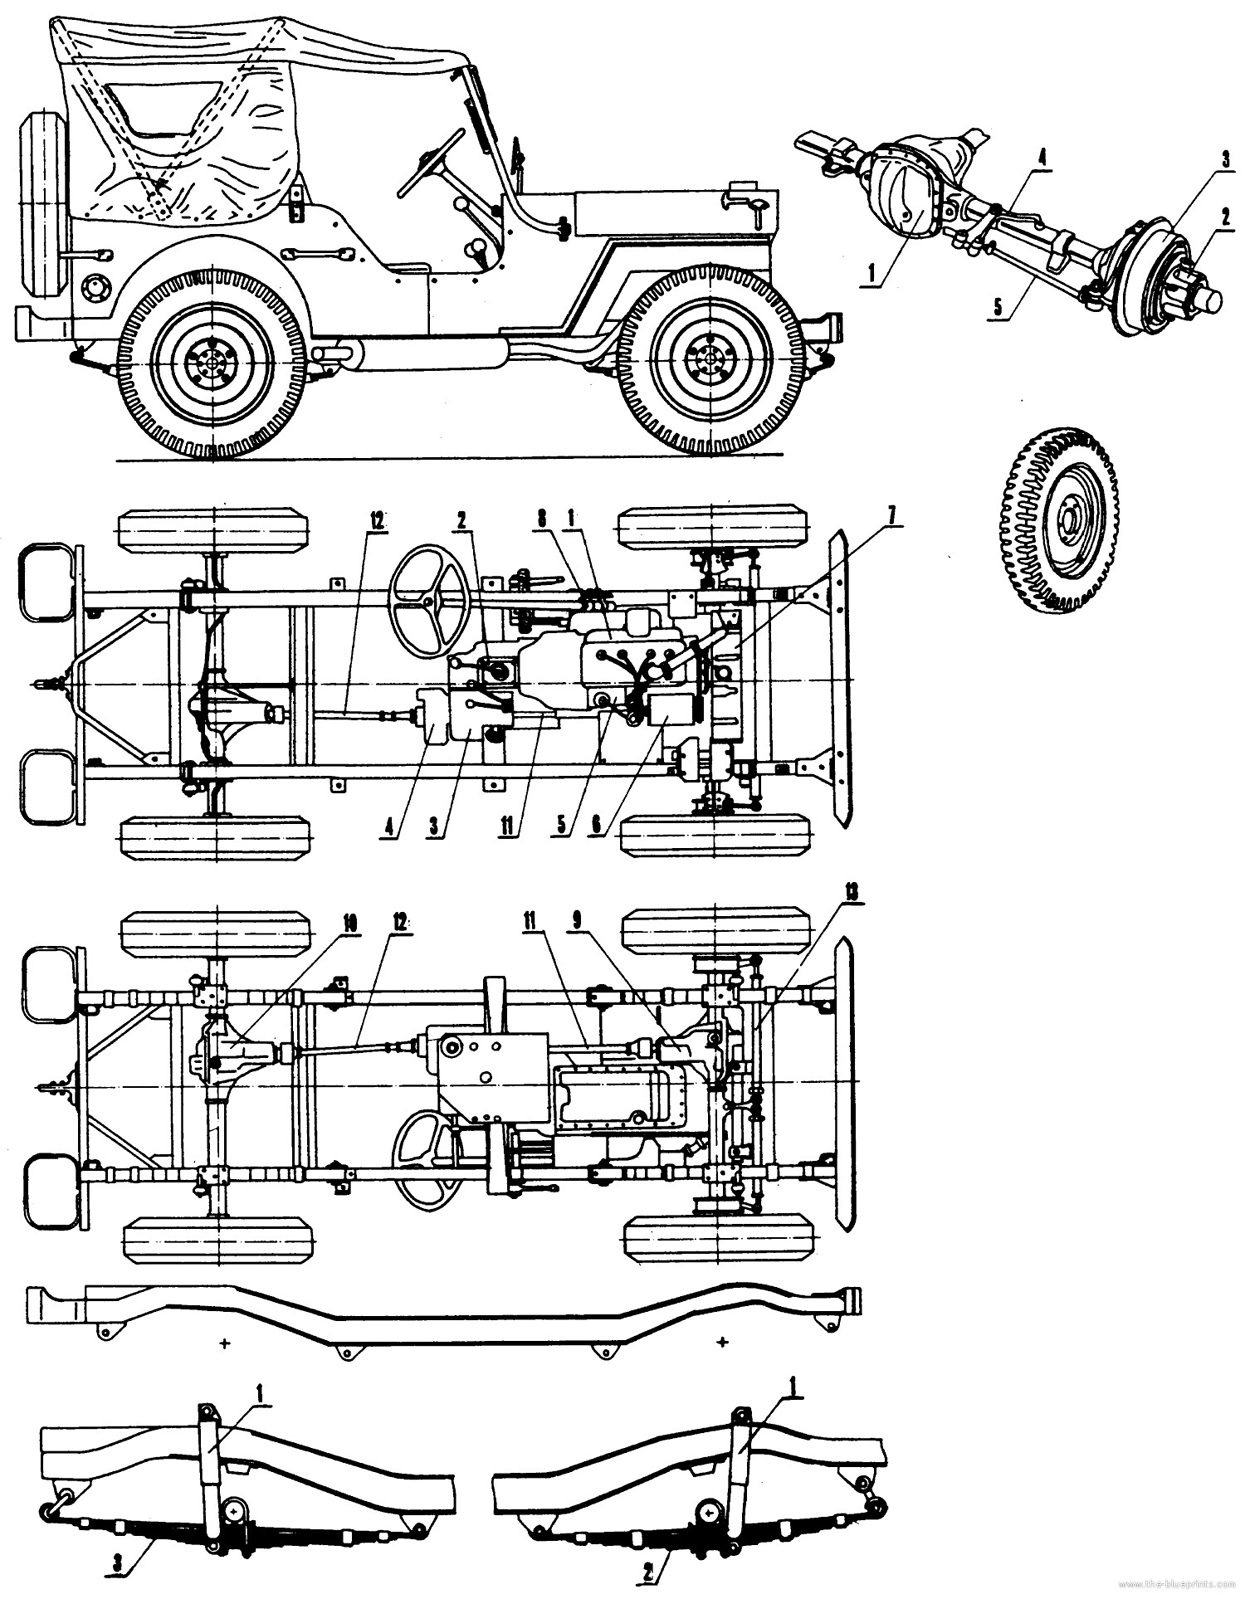 Willys Jeep(reduced).jpg